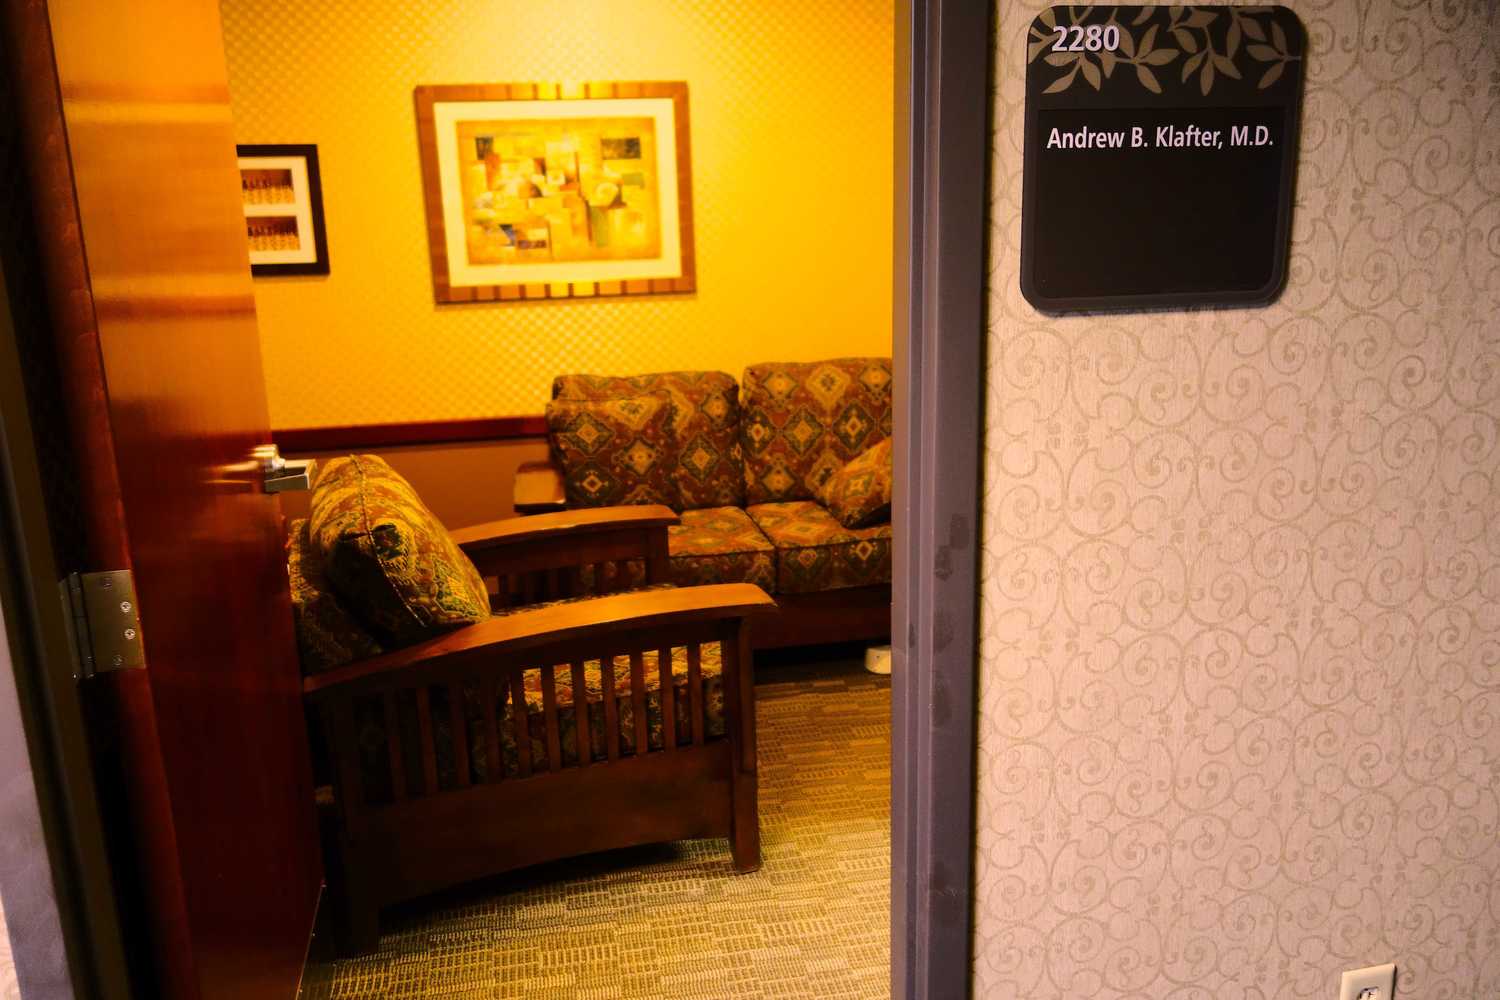 Gallery Photo of Dr. Klafter's Waiting Room